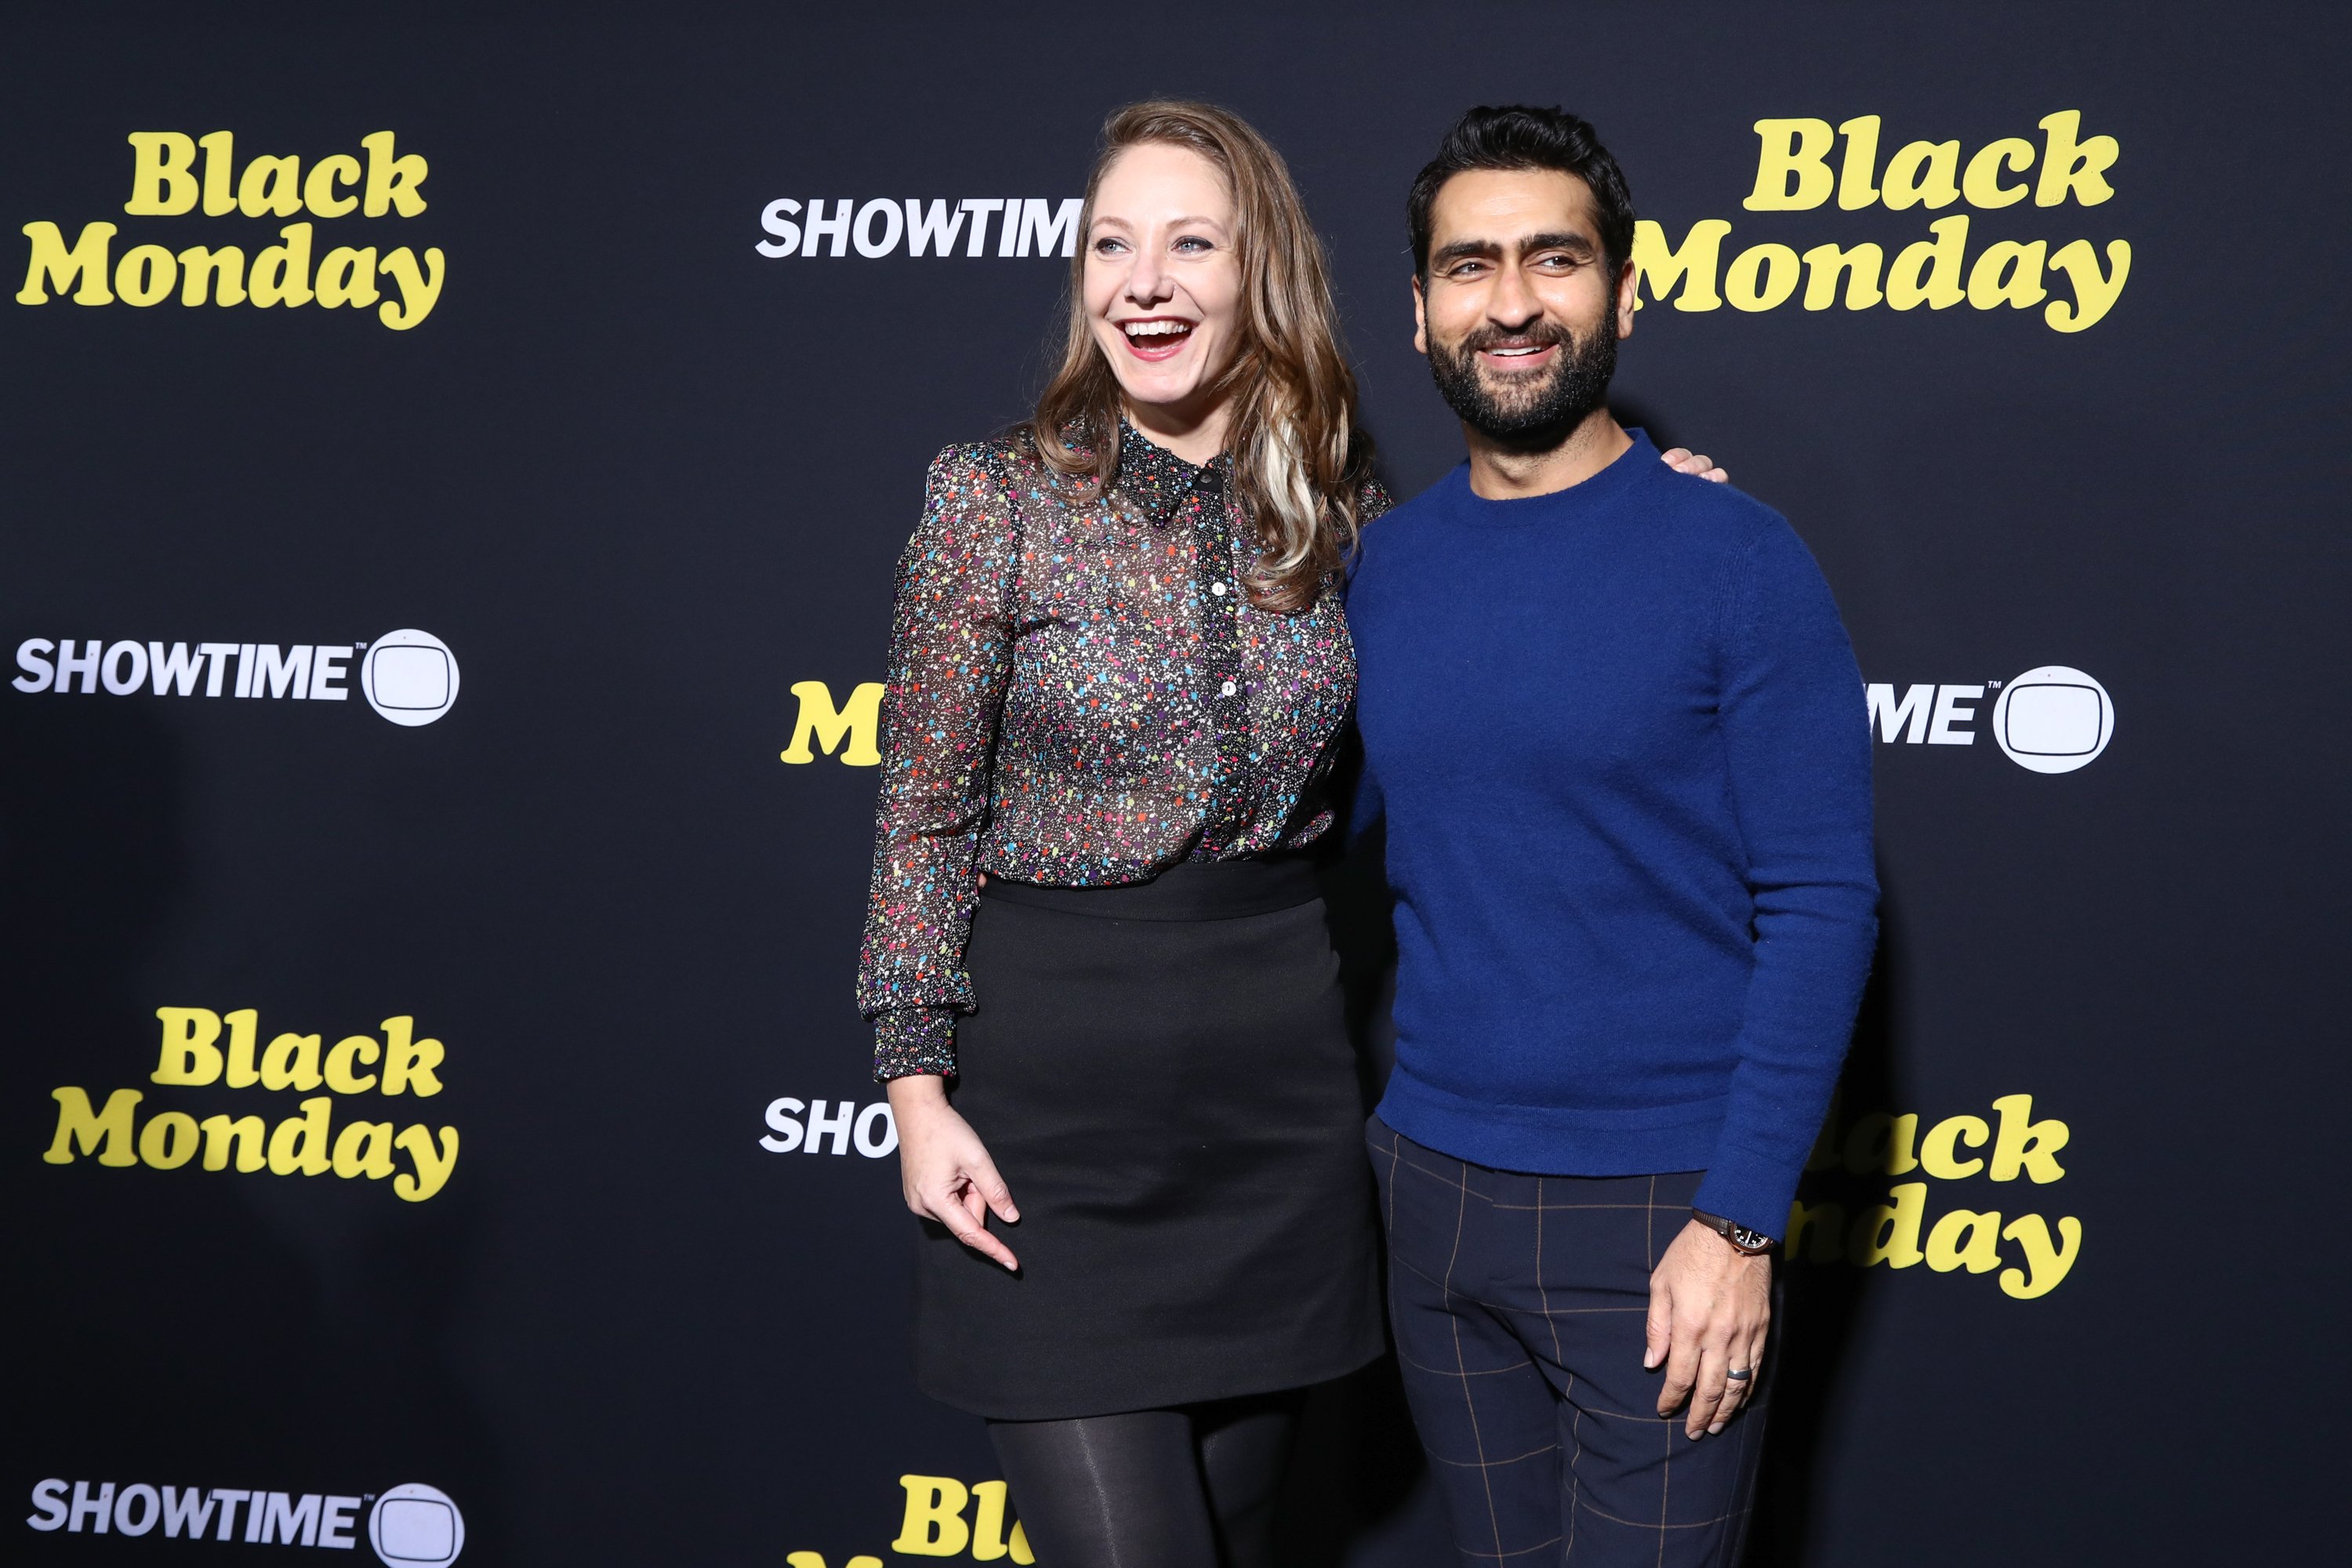 Emily V. Gordon and Kumail Nanjiani at the premiere of Showtime's "Black Monday" in January 2019 in Los Angeles. | Photo: Getty Images